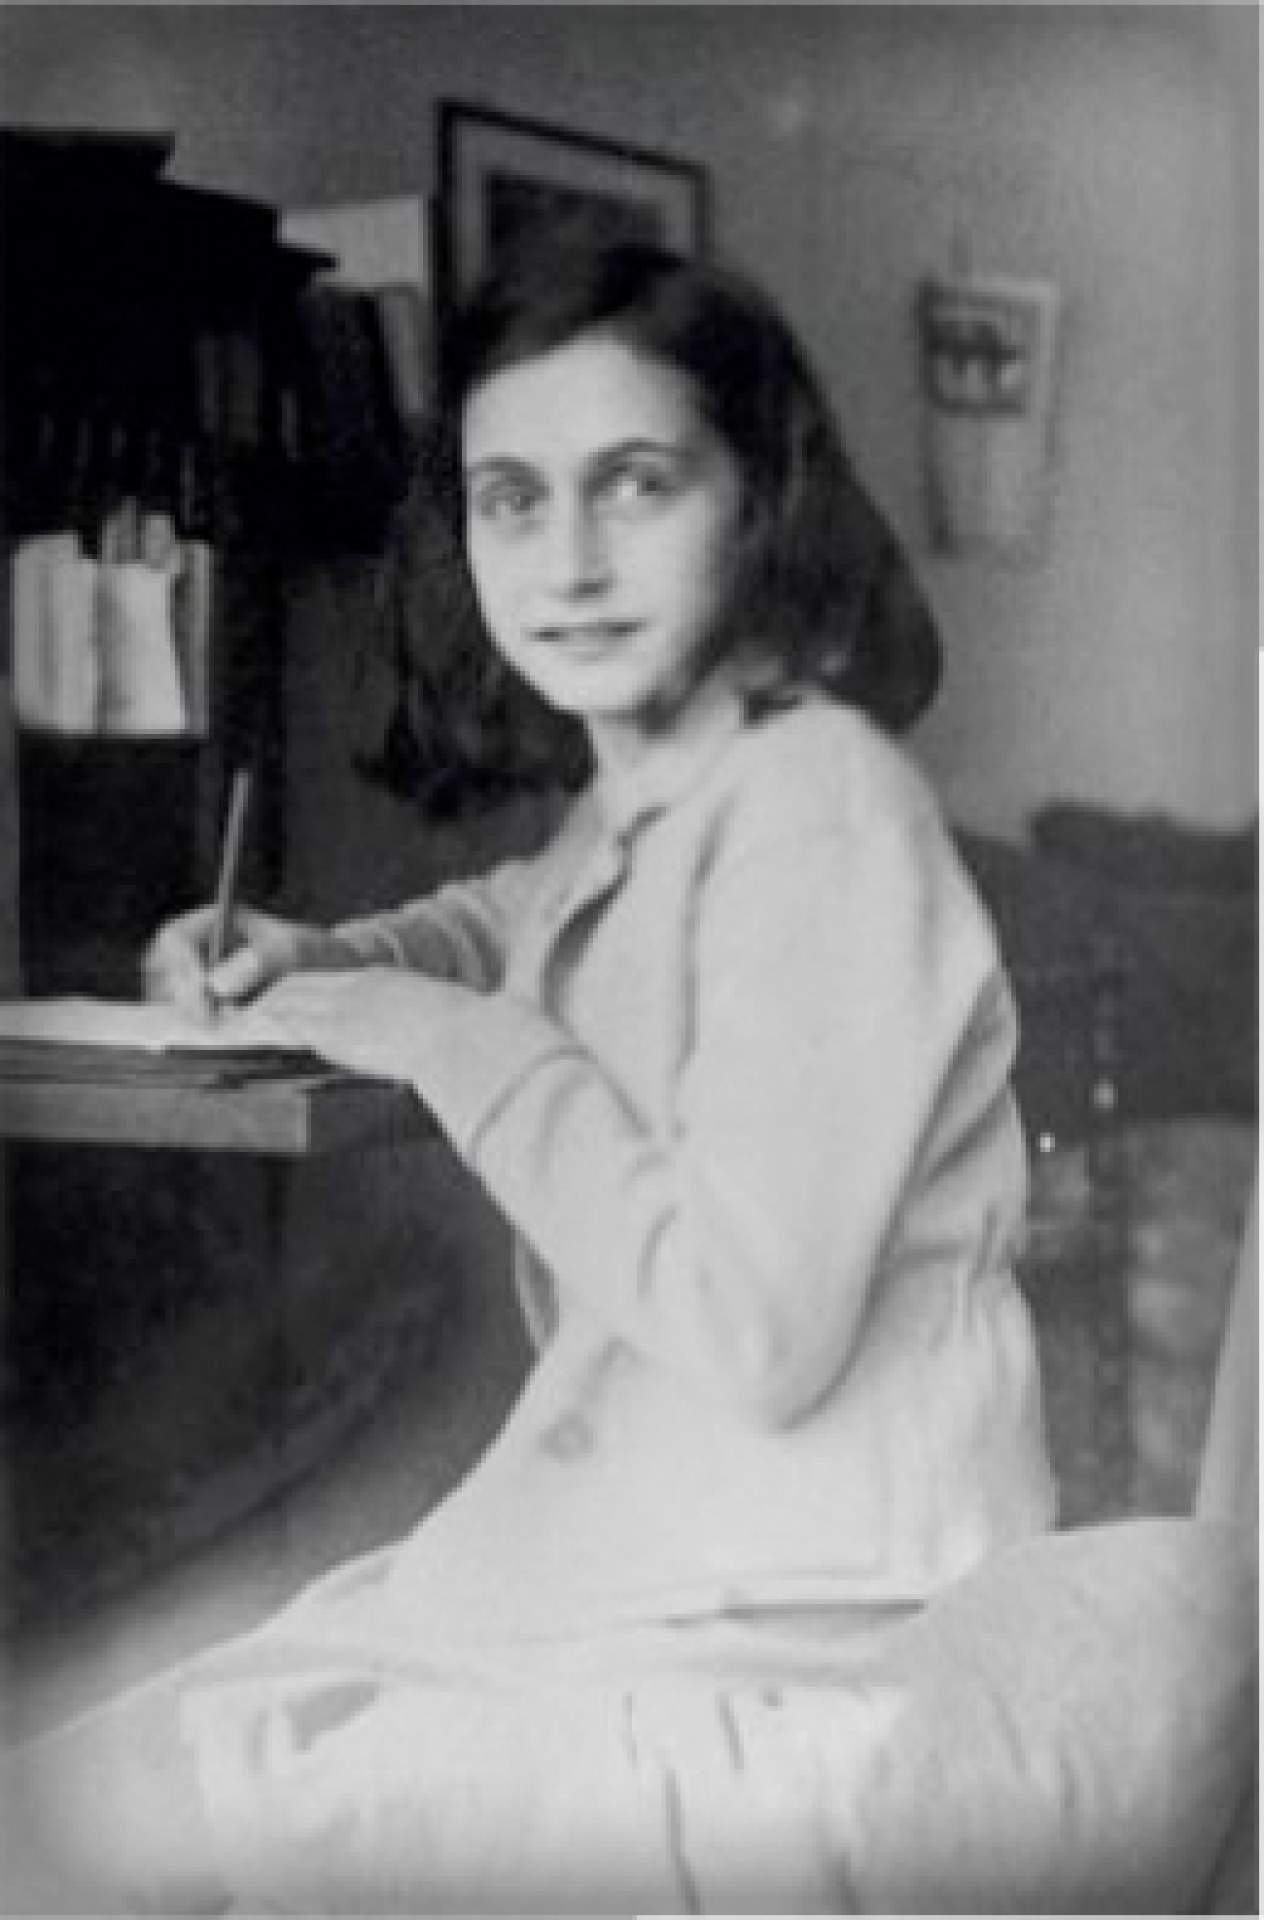 Anne Frank: A History for Today opens at the Burchfield Penney in September